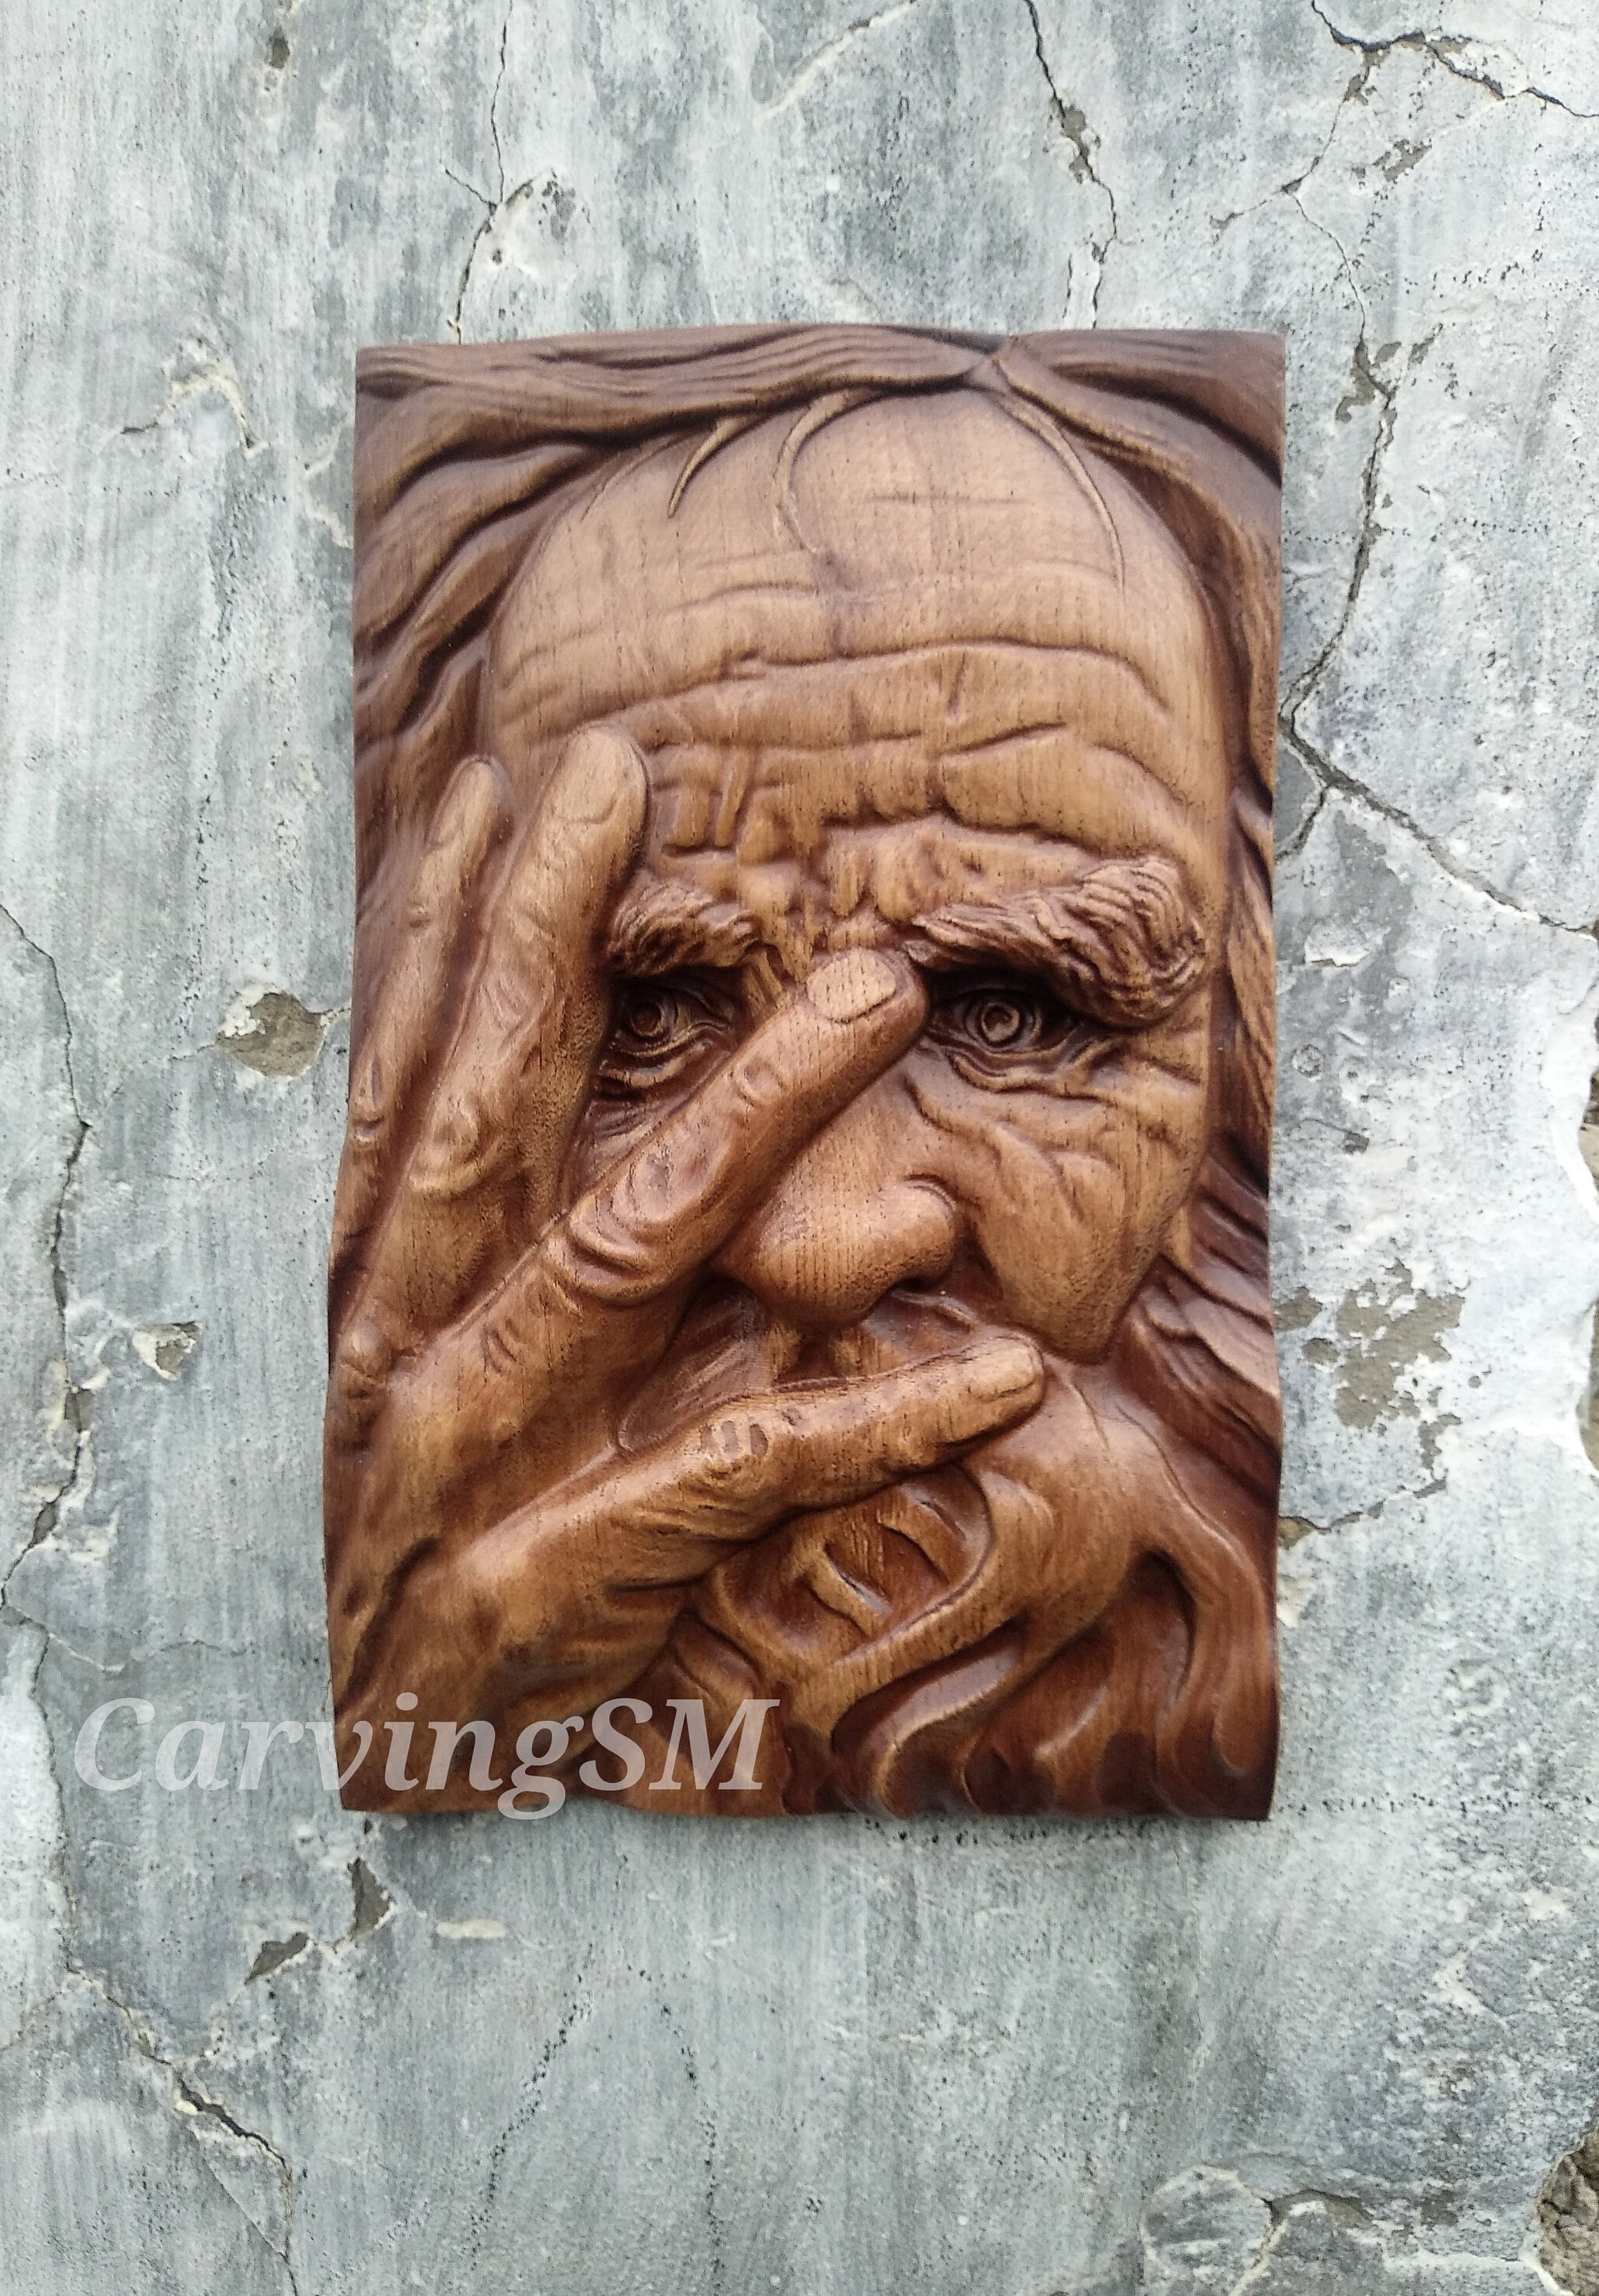 20 Wood Carving Ideas For A Rustic Home Decor  Simple wood carving, Wood  carving art, Dremel wood carving